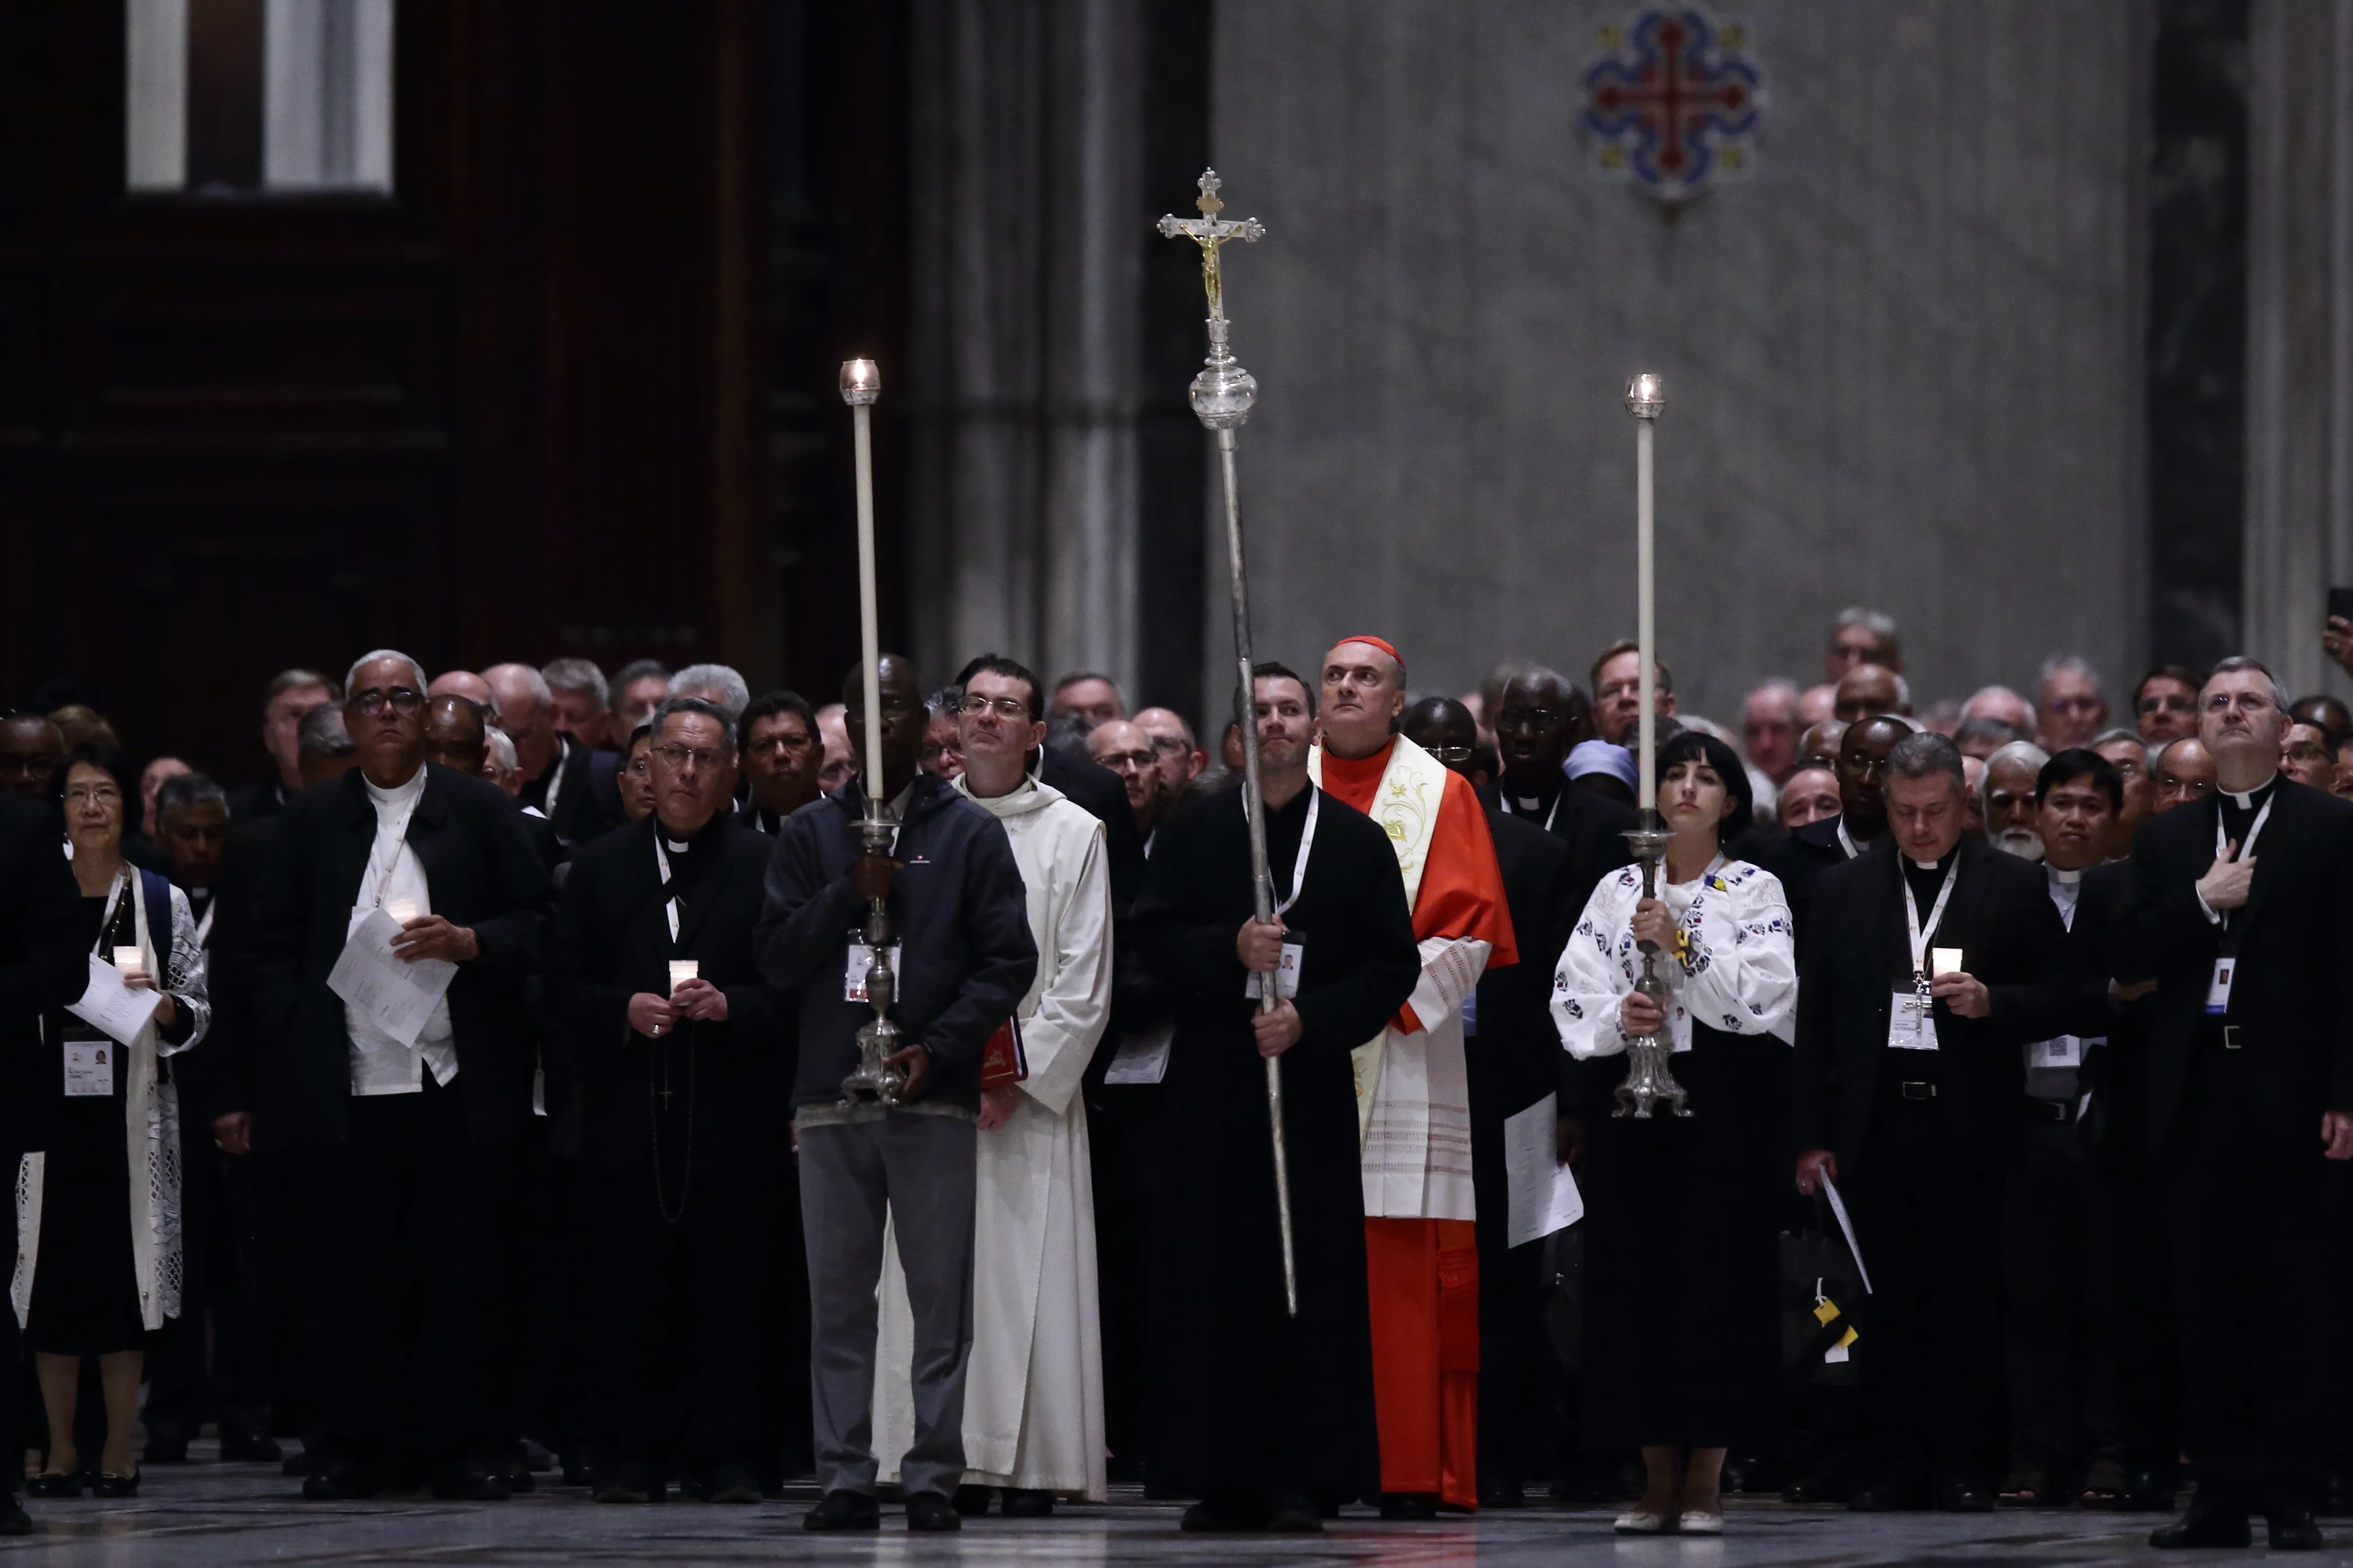 Synod members, led by Cardinal Gabetti, process into Saint Peter’s Basilica to pray the Rosary for Peace.?w=200&h=150